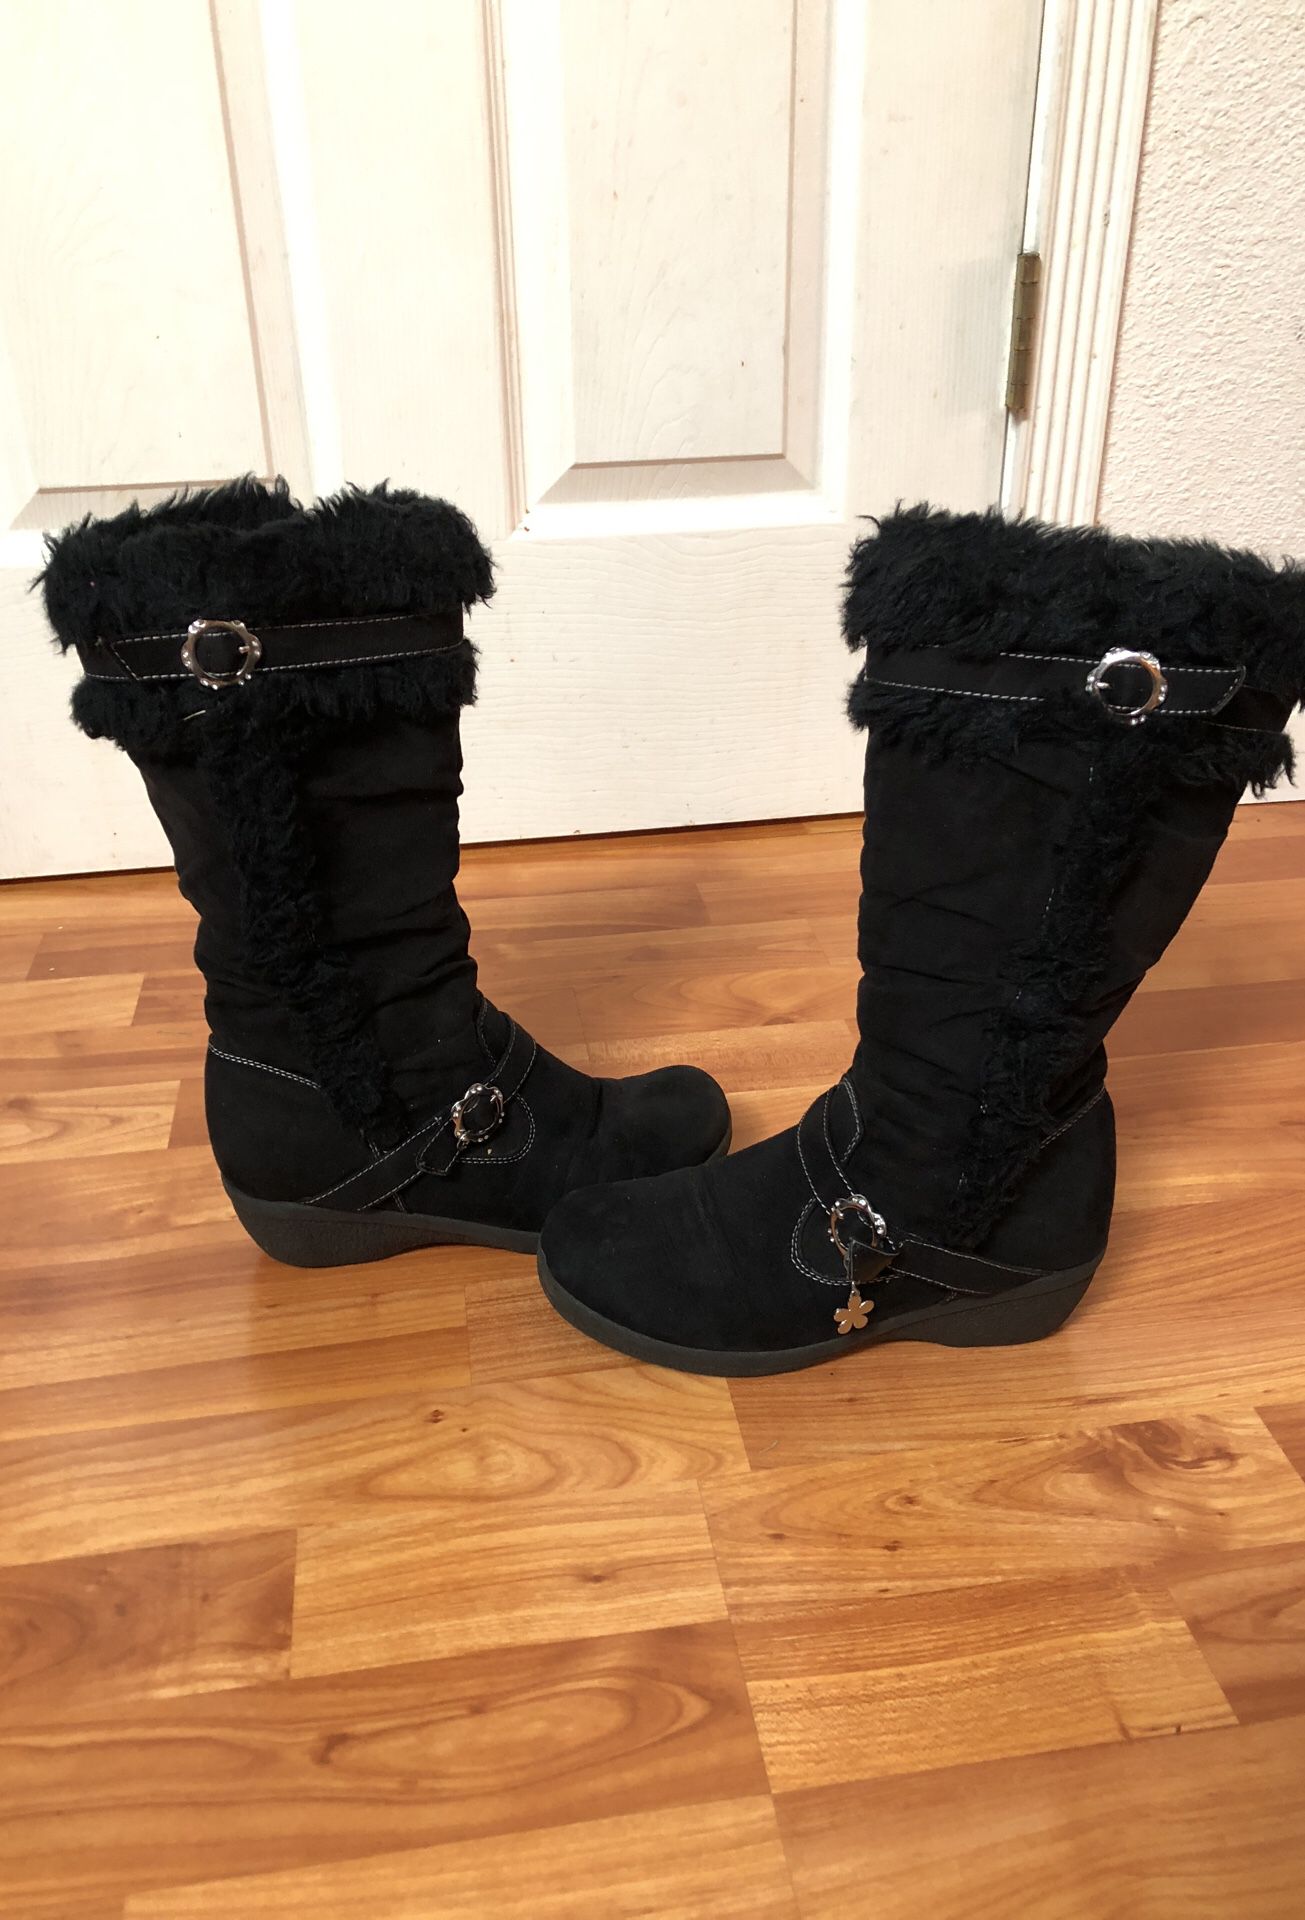 Girls boots size 5